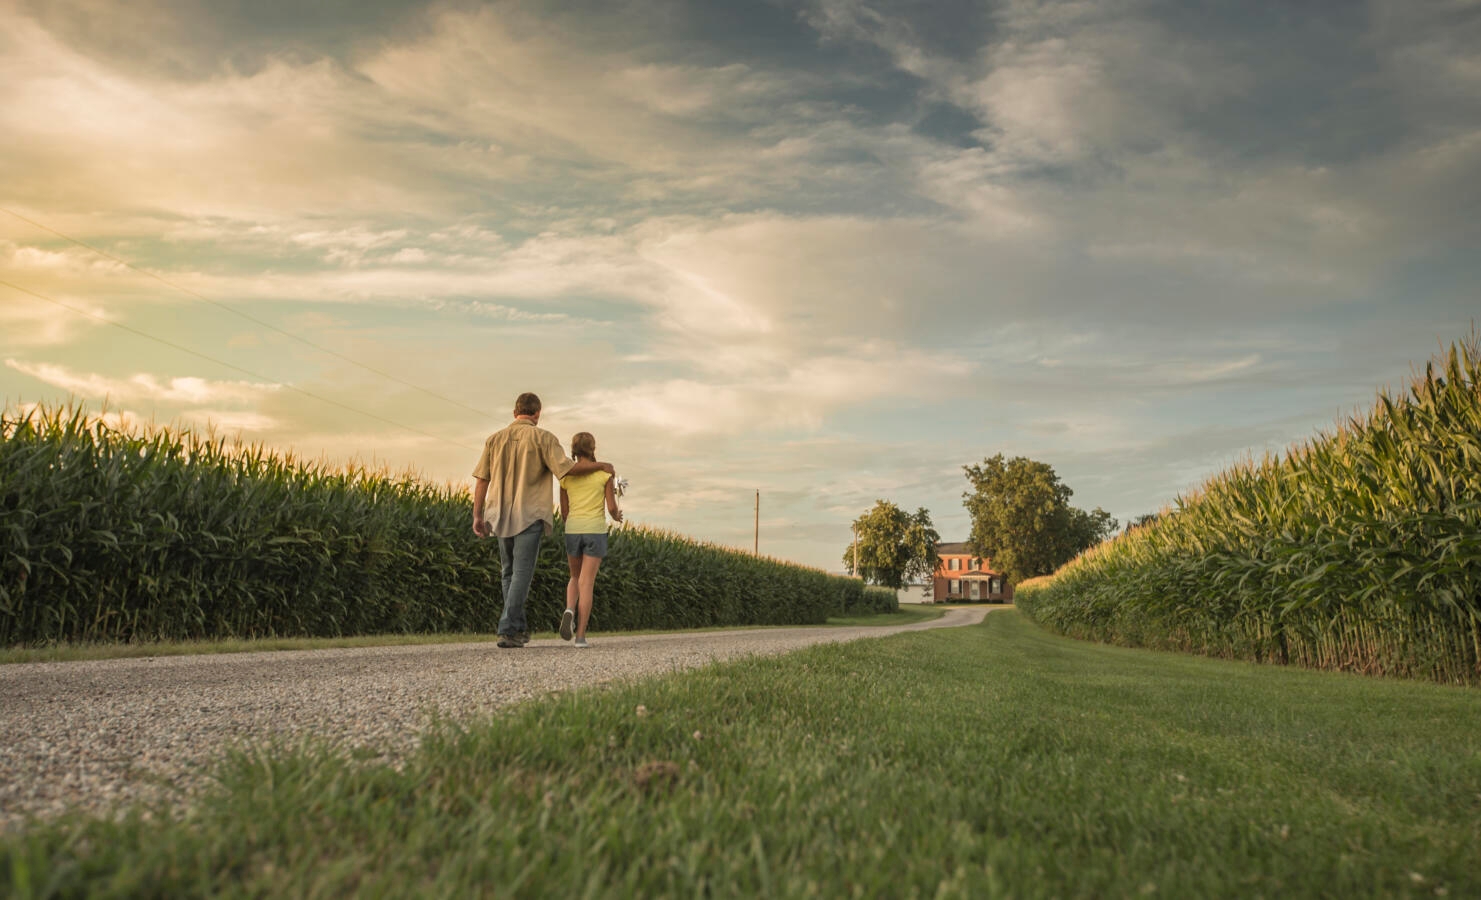 Caucasian father and daughter walking on dirt path by corn field